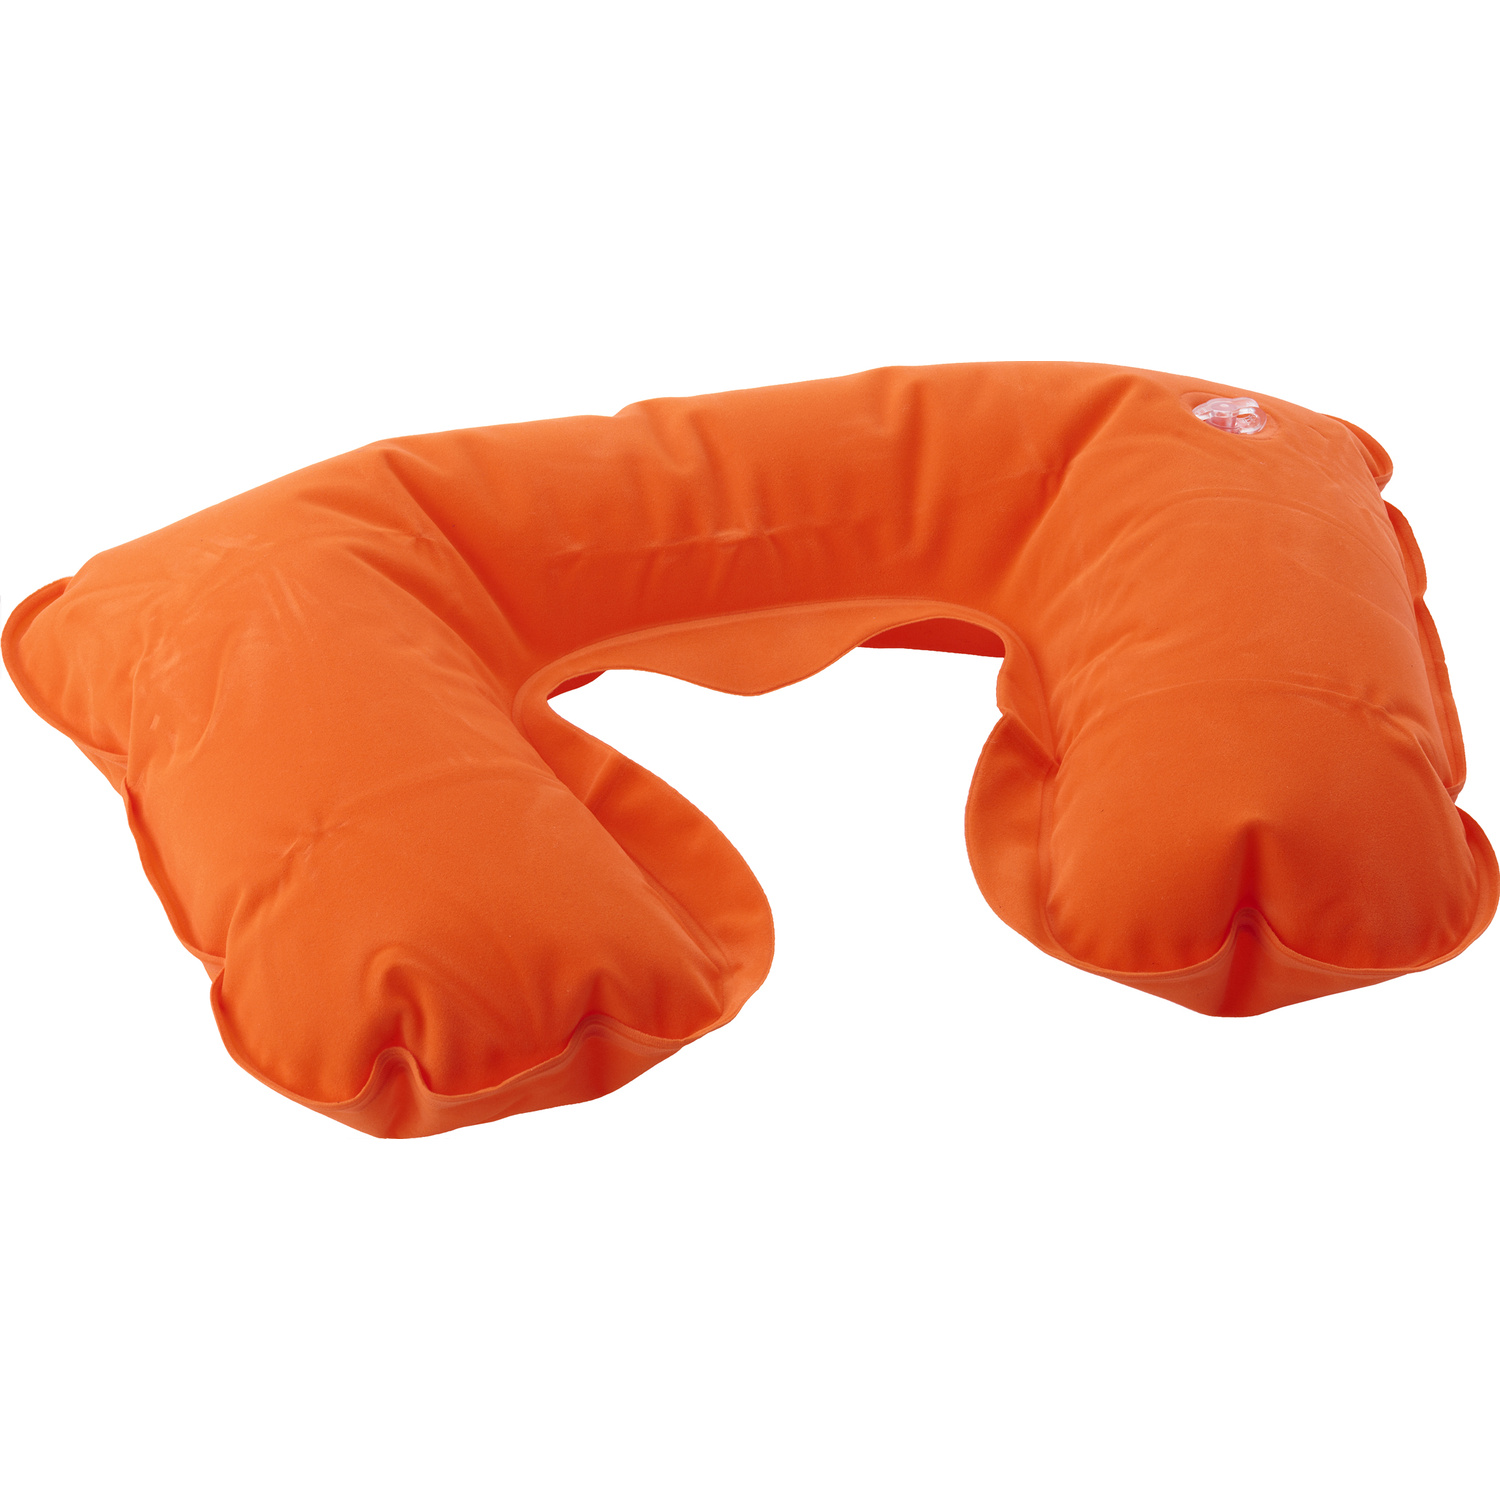 009651 007999999 3d135 top pro01 fal - Inflatable travel cushion